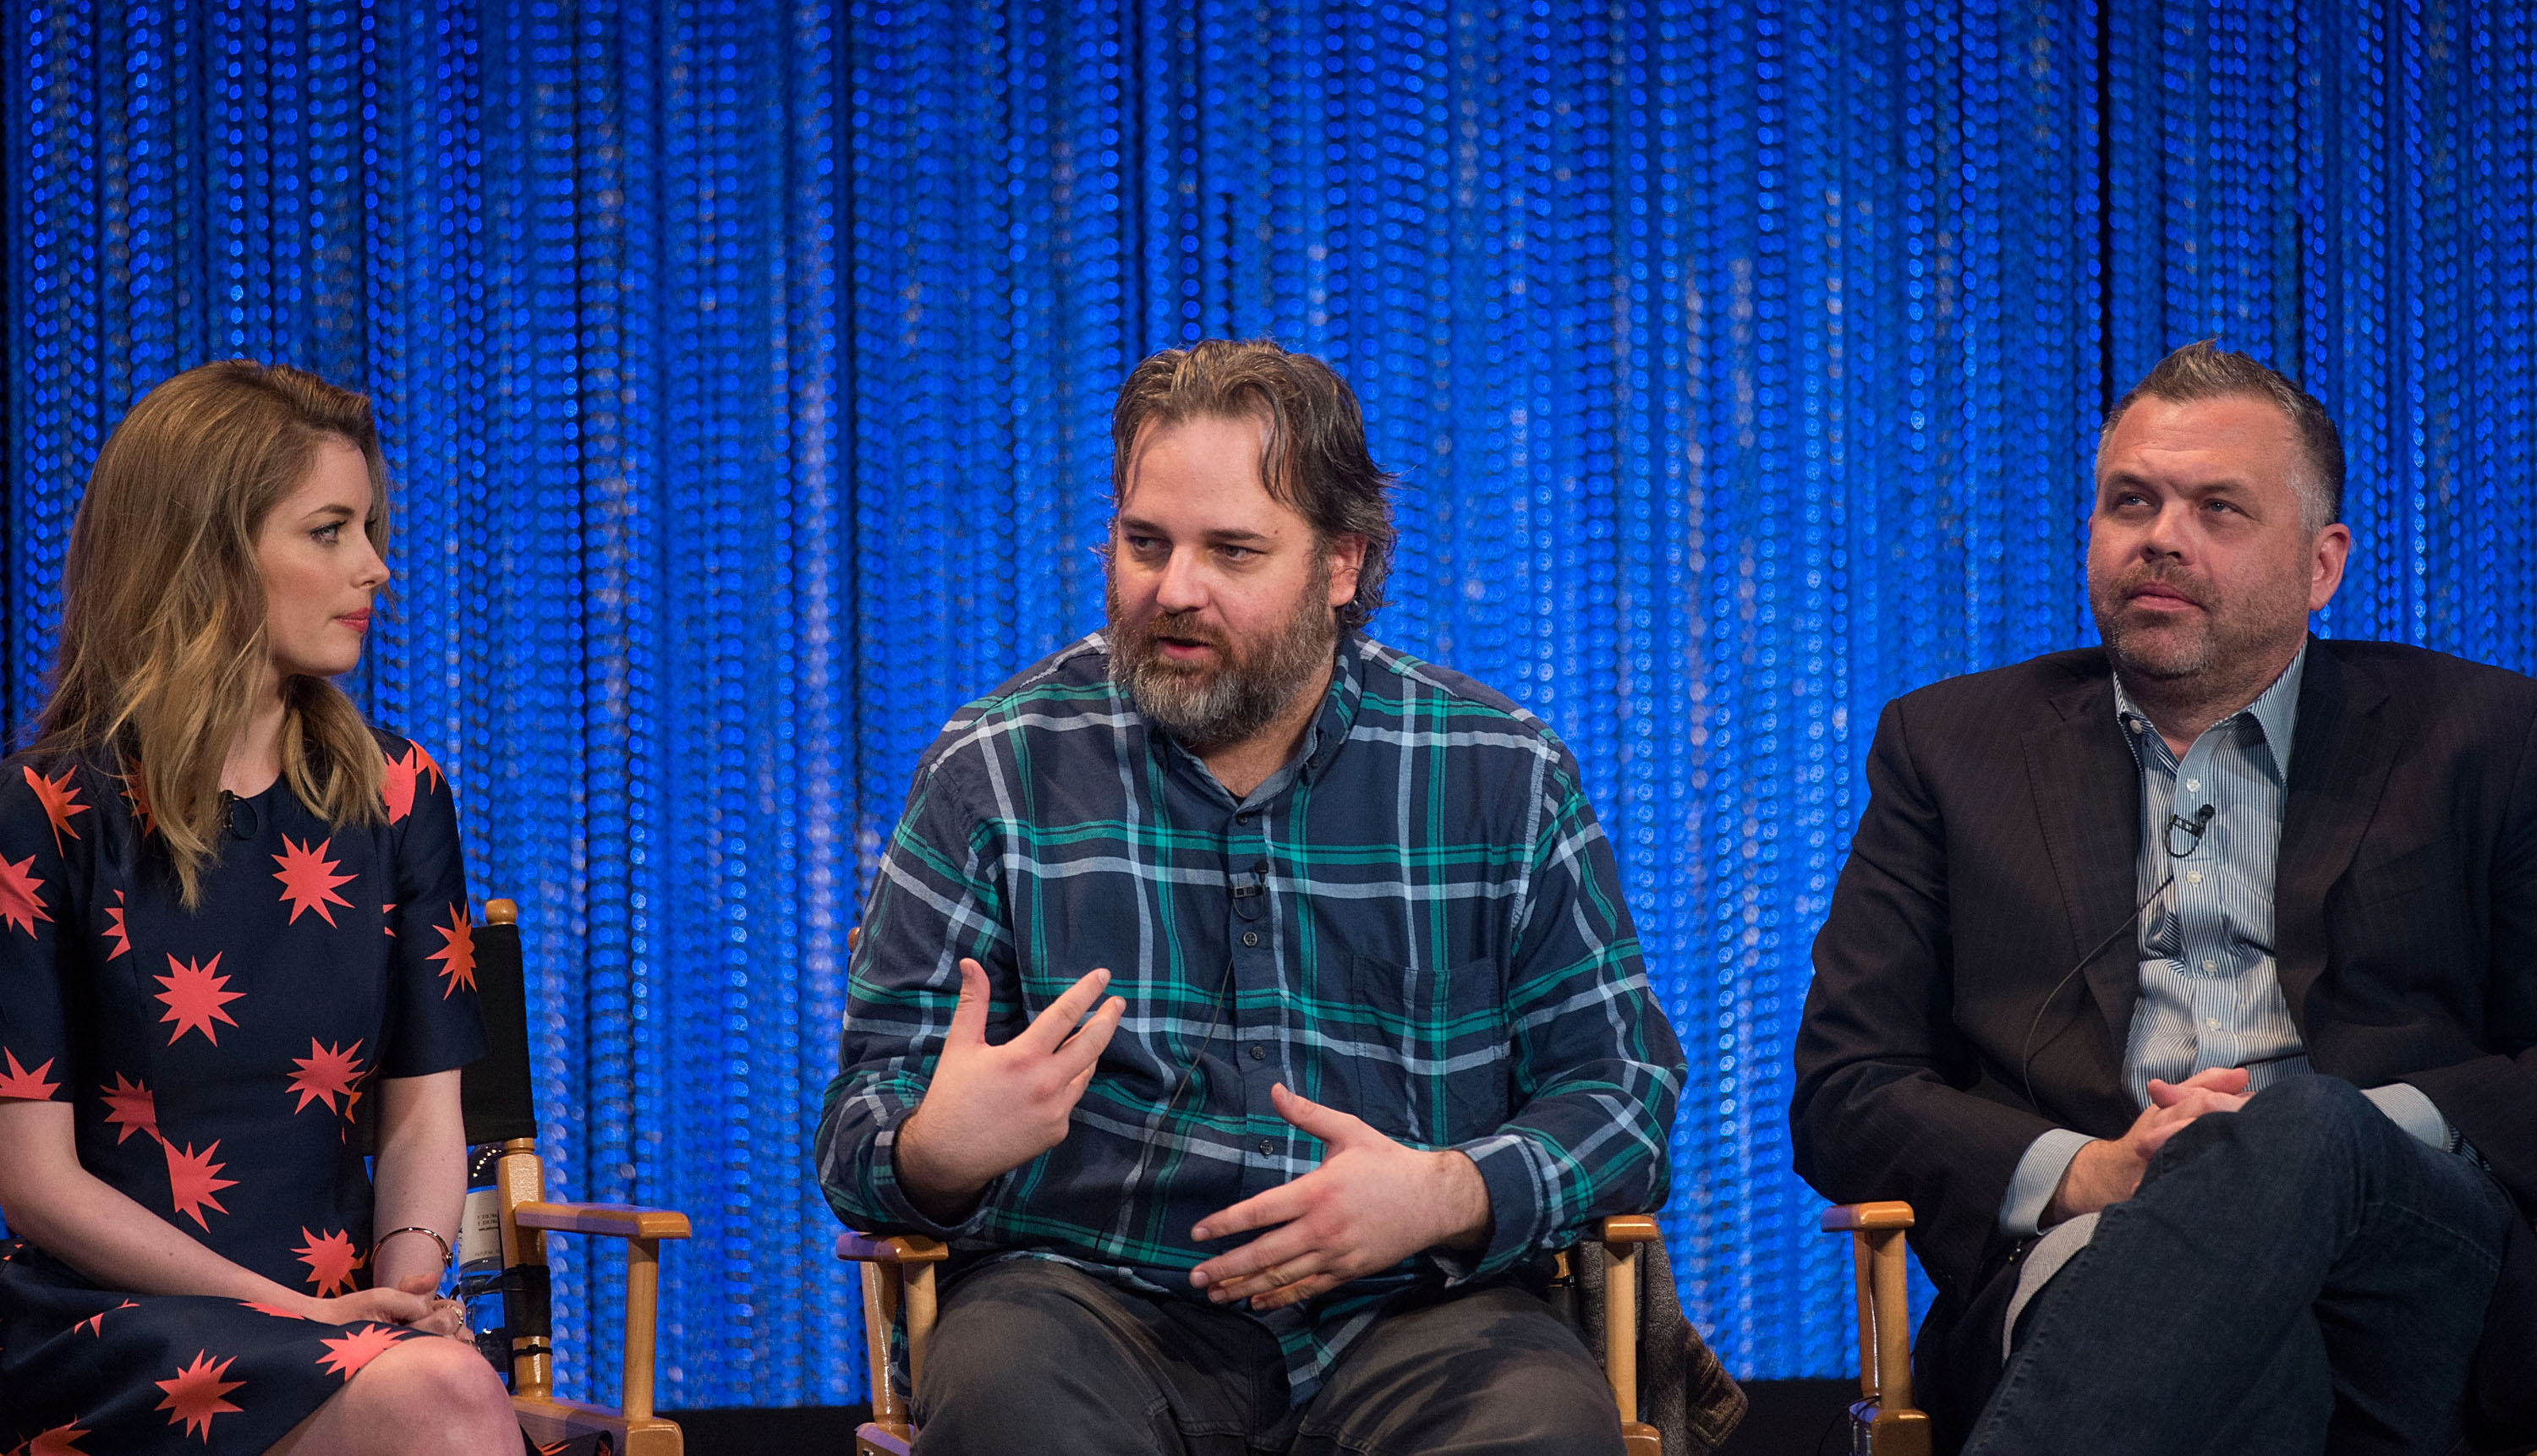 Dan Harmon on the Creative Clashes He Experienced While Working on ‘Community’